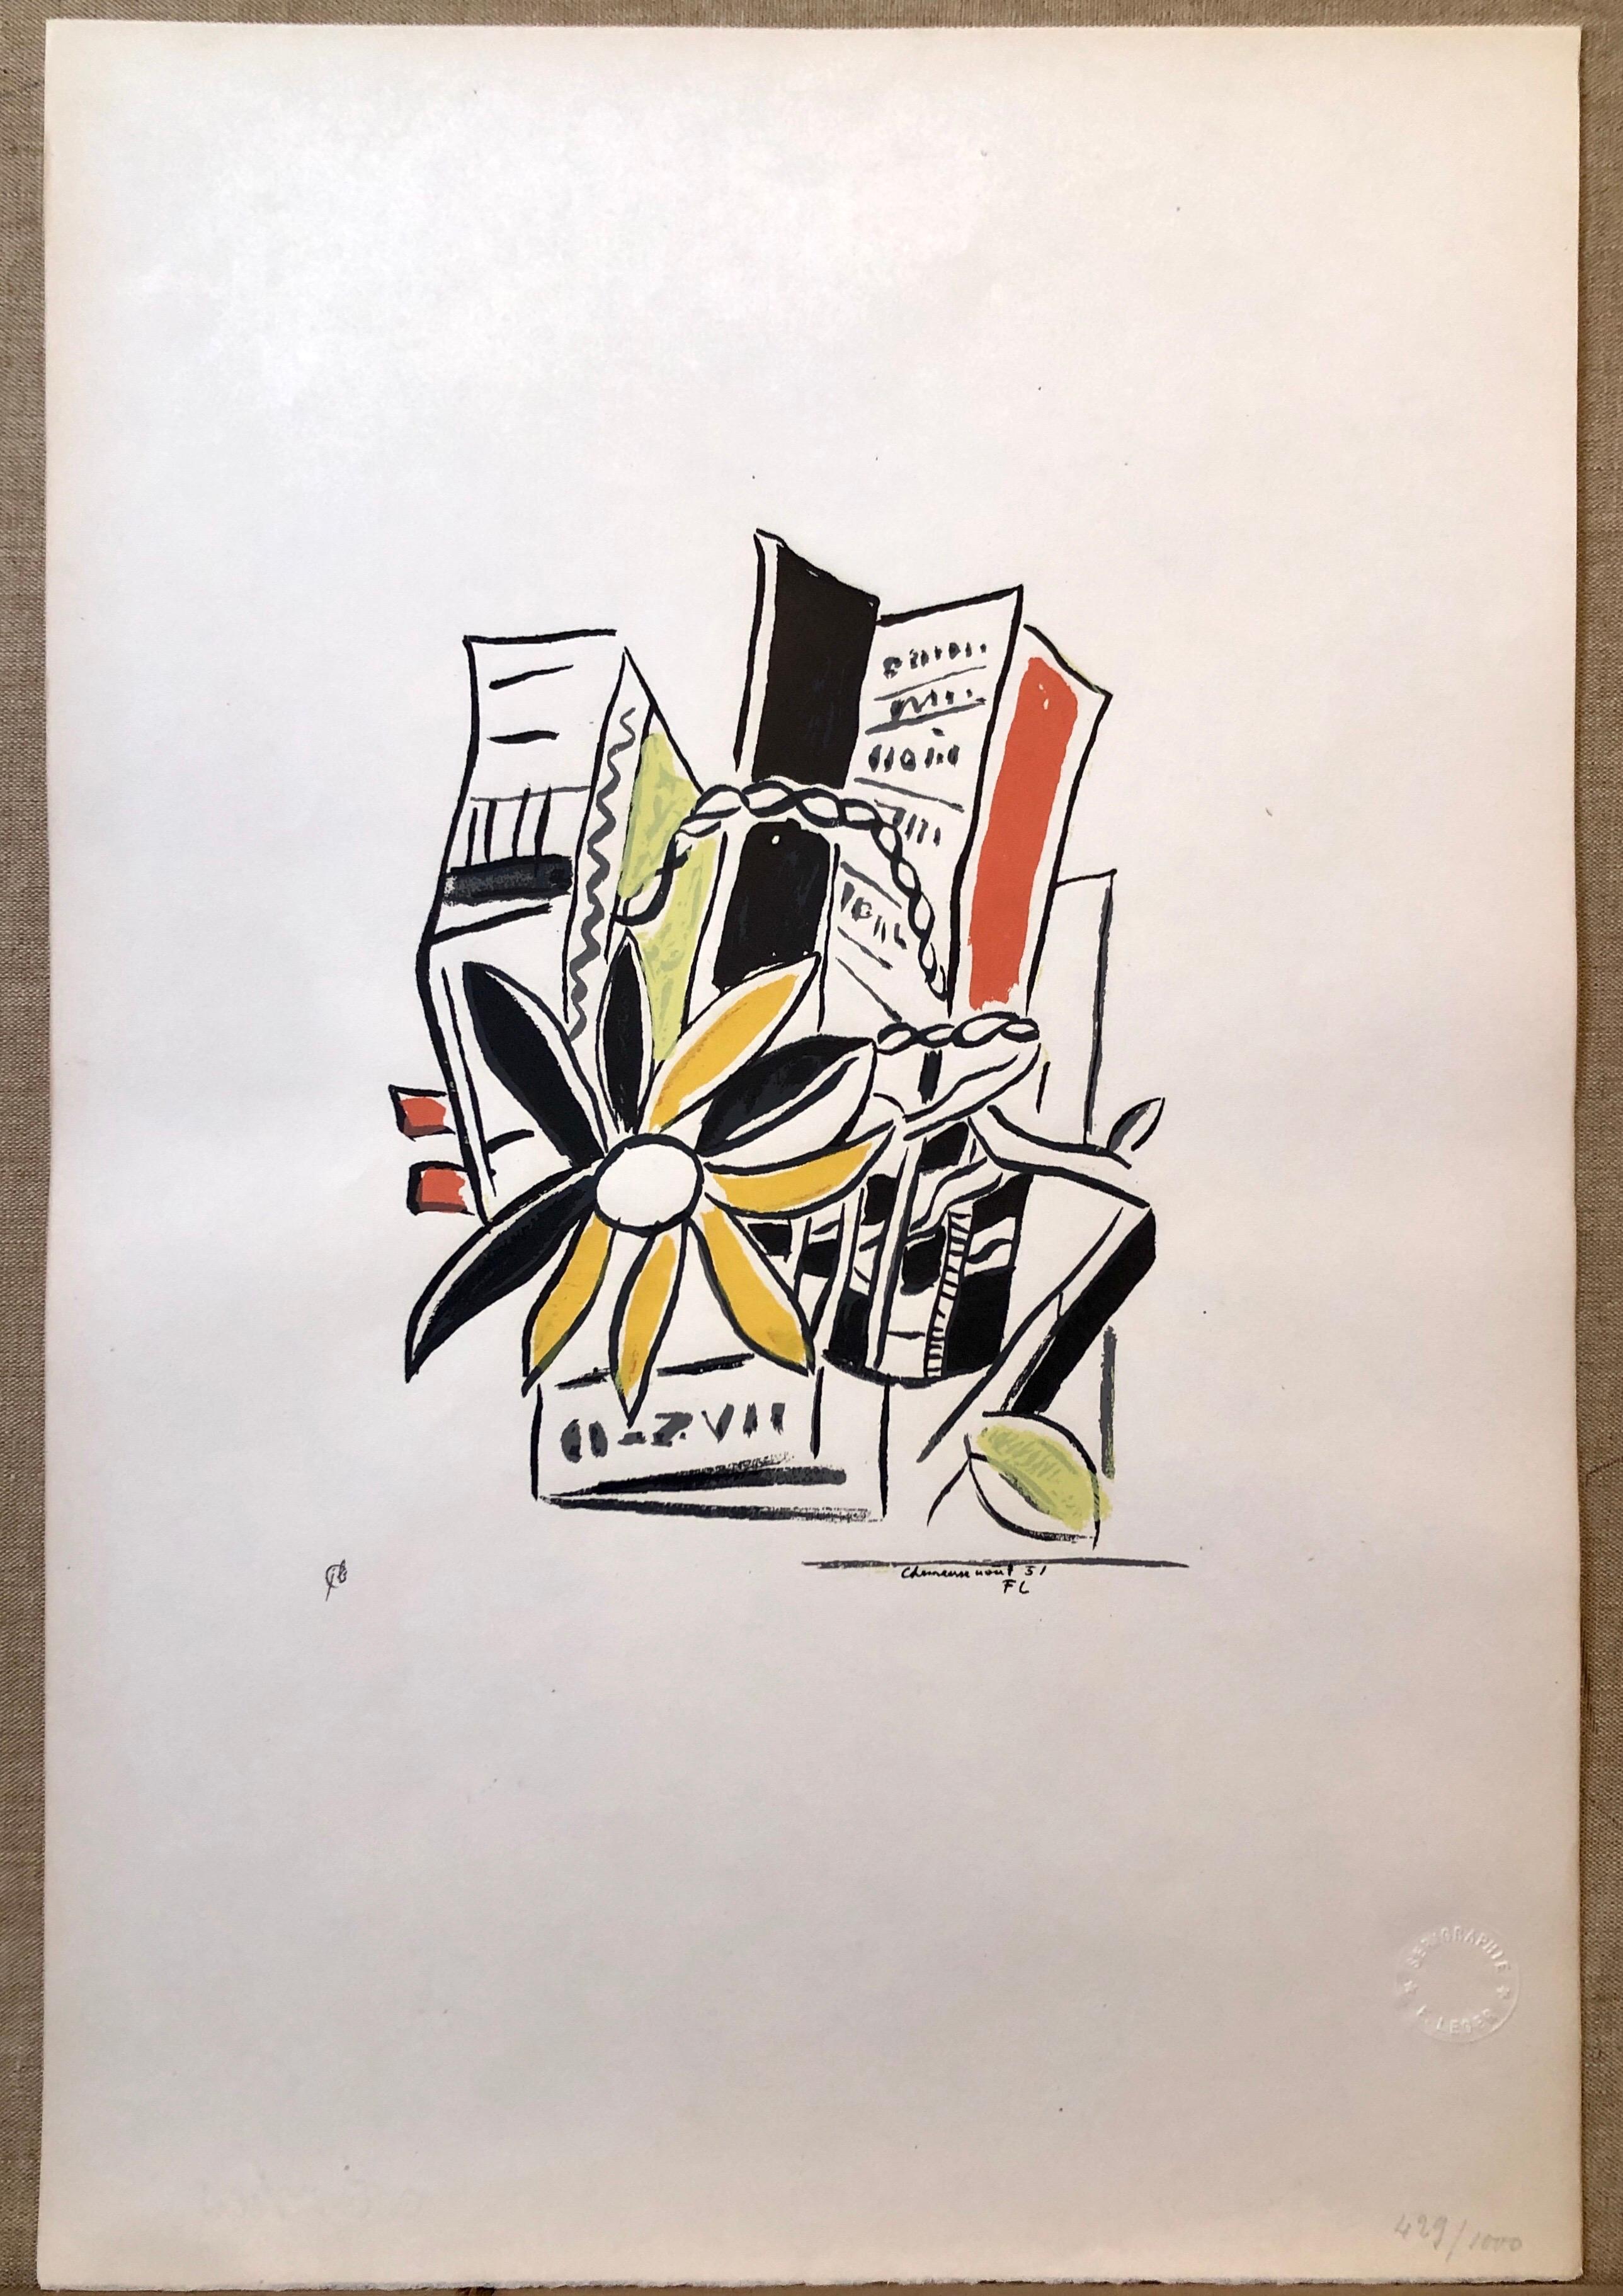 Fernand Leger Colorful Modernist Drawing Limited Edition Serigraph Lithograph - Print by (after) Fernand Léger